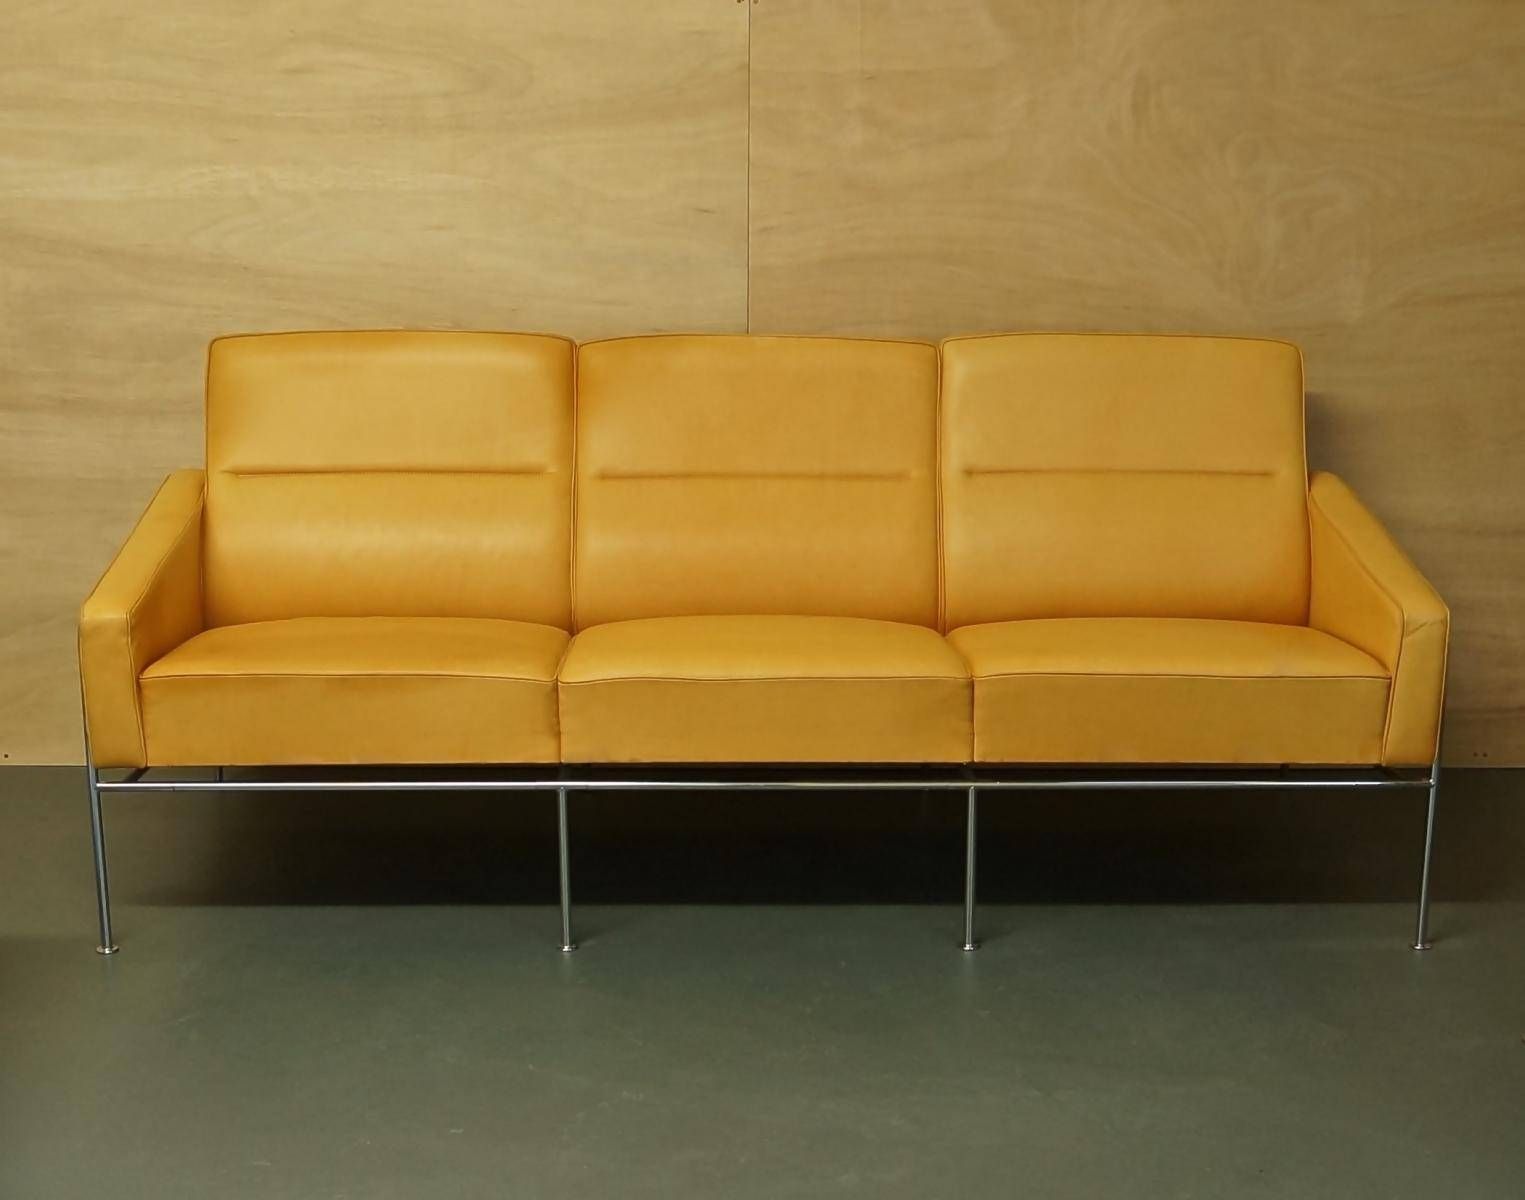 Vintage Light Tan Leather Series 3303 Sofaarne Jacobsen For Pertaining To Light Tan Leather Sofas (View 13 of 30)